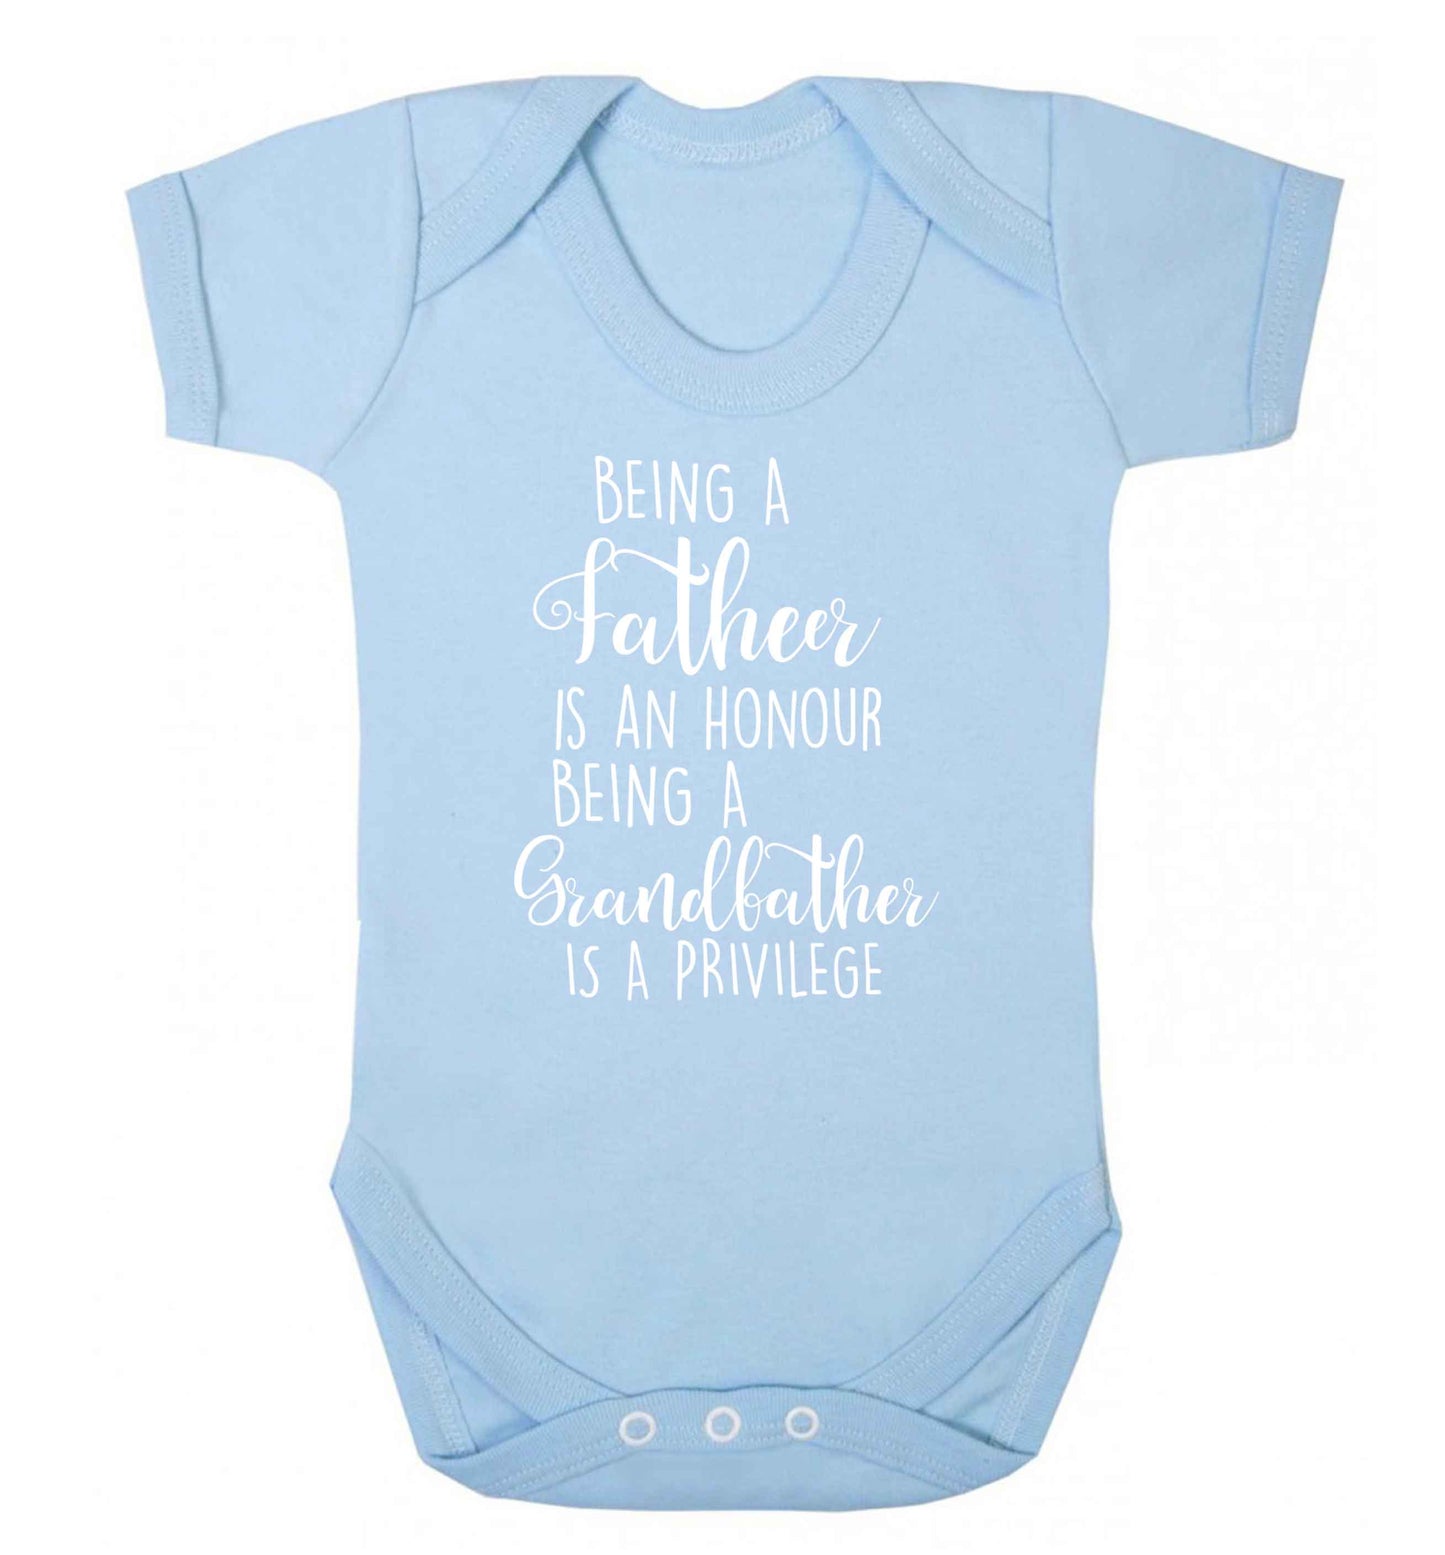 Being a father is an honour being a grandfather is a privilege Baby Vest pale blue 18-24 months